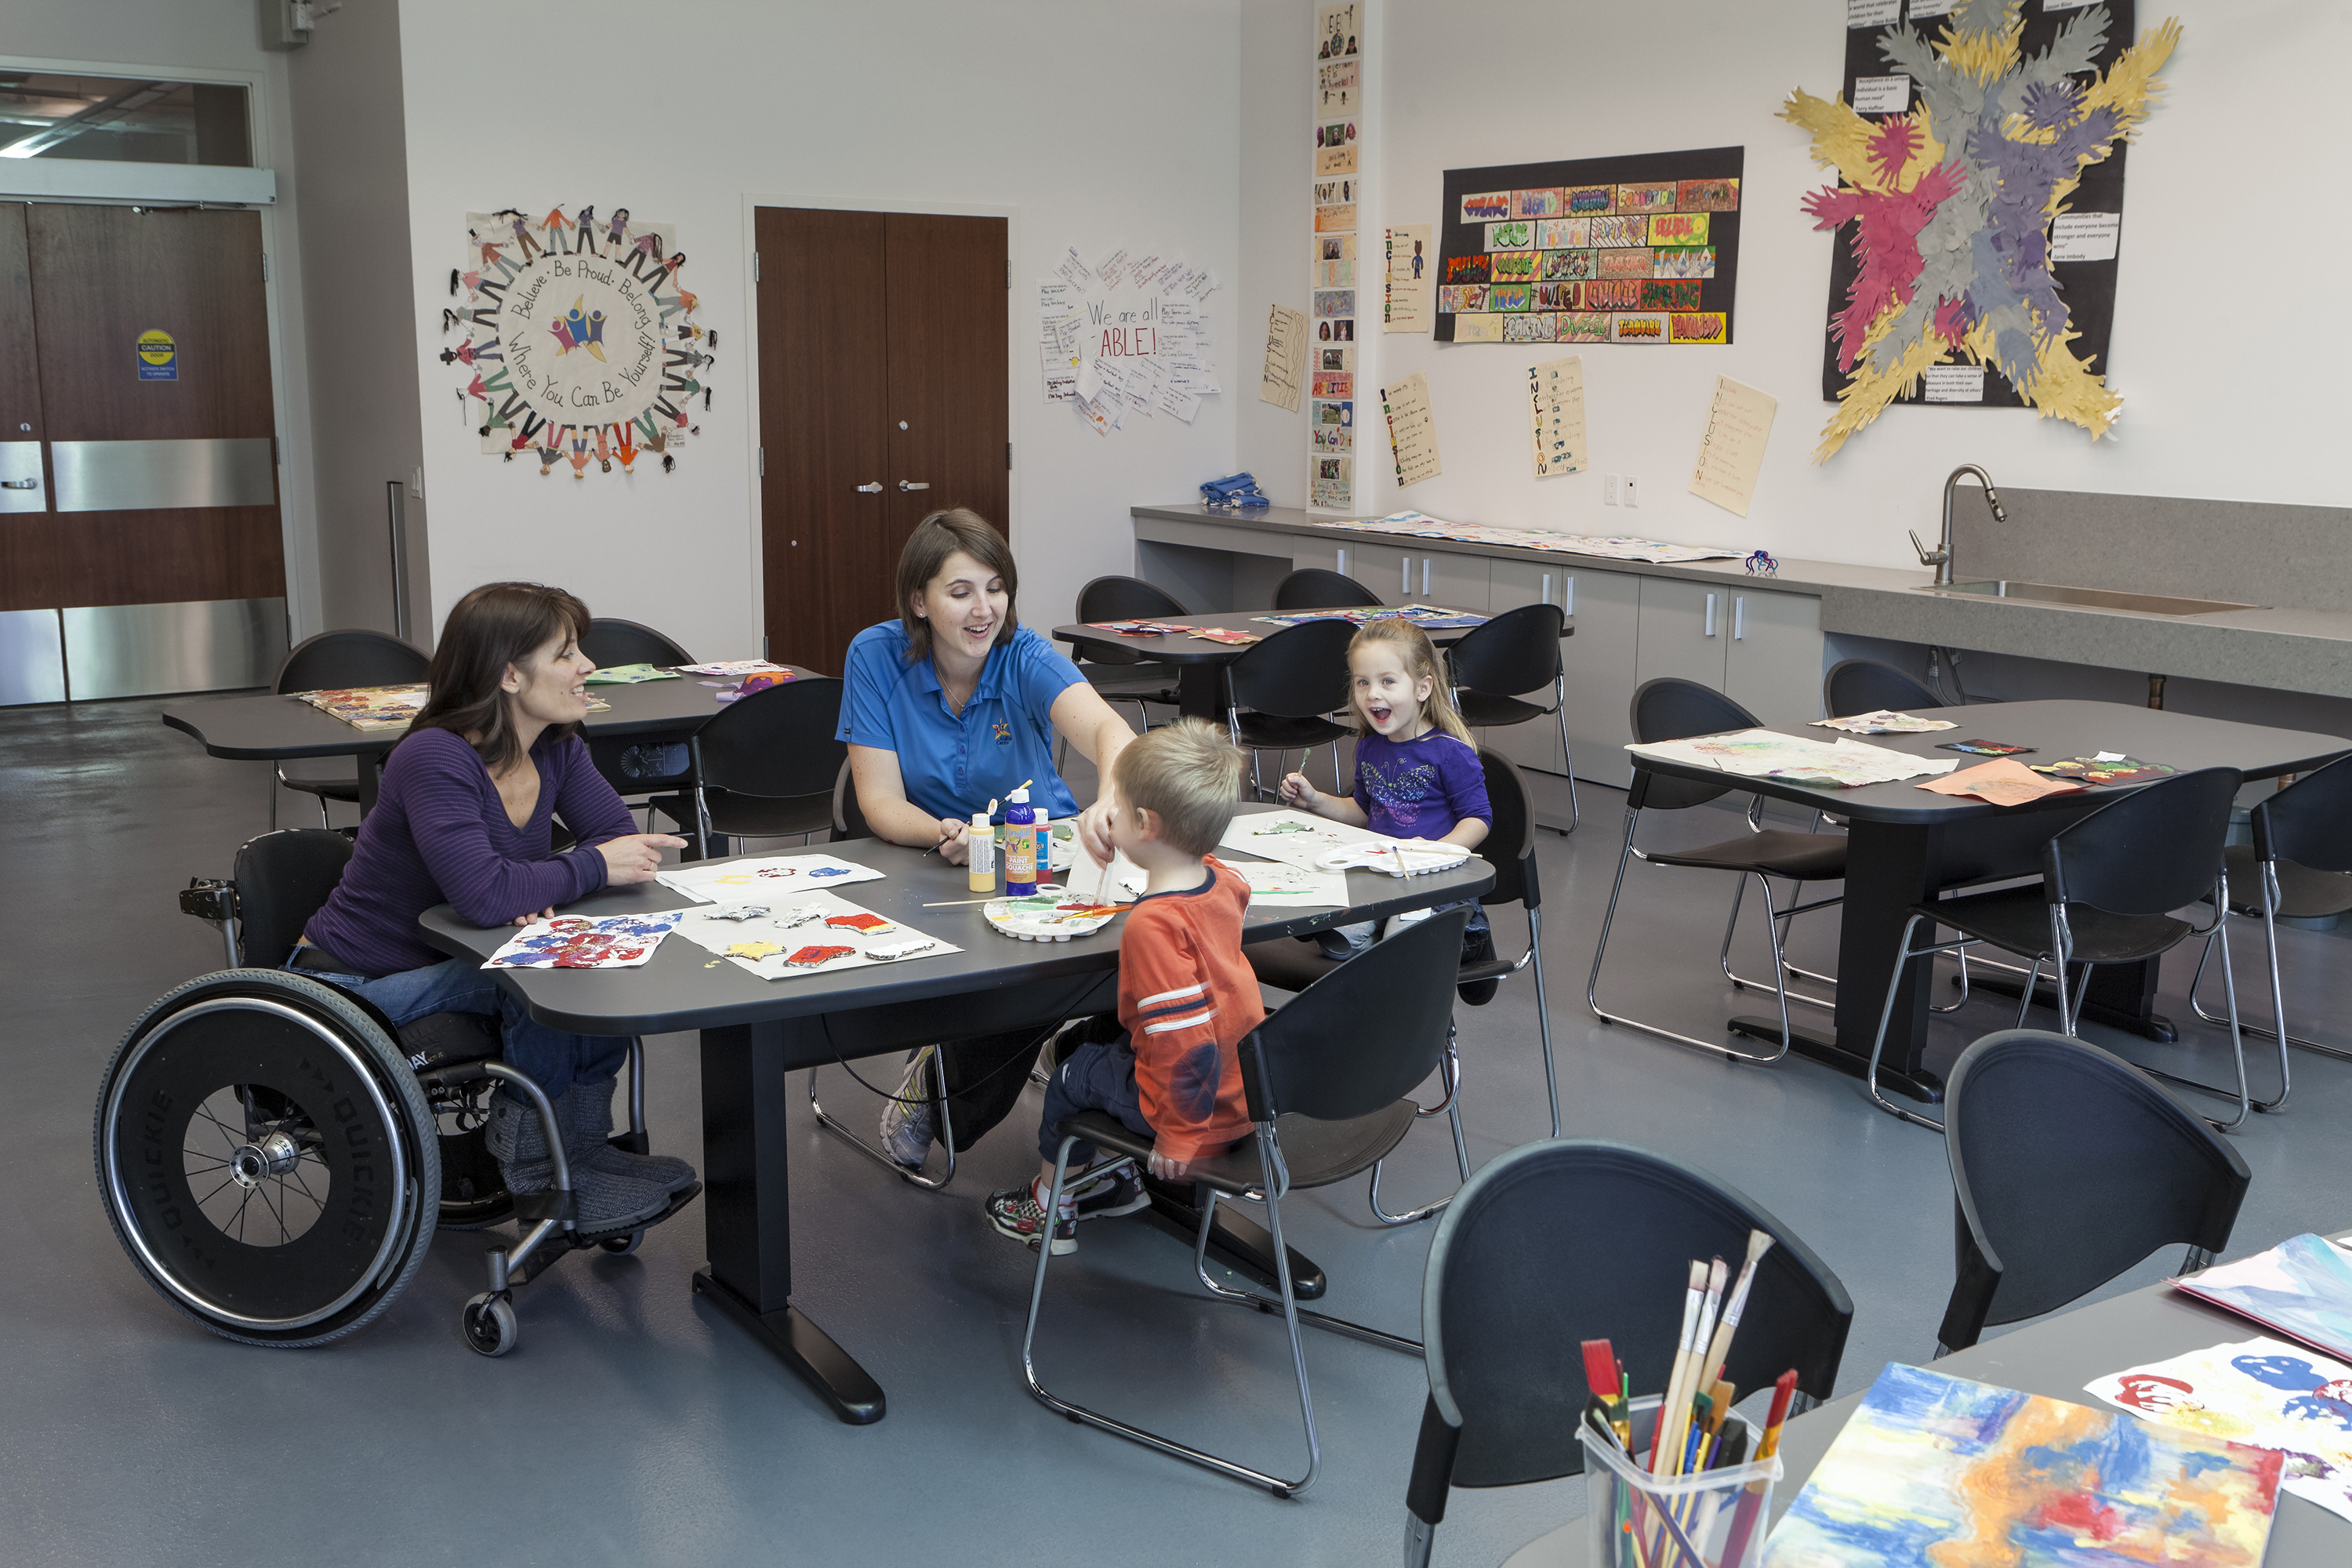 A person in a wheelchair, others, and children painting art around a table.